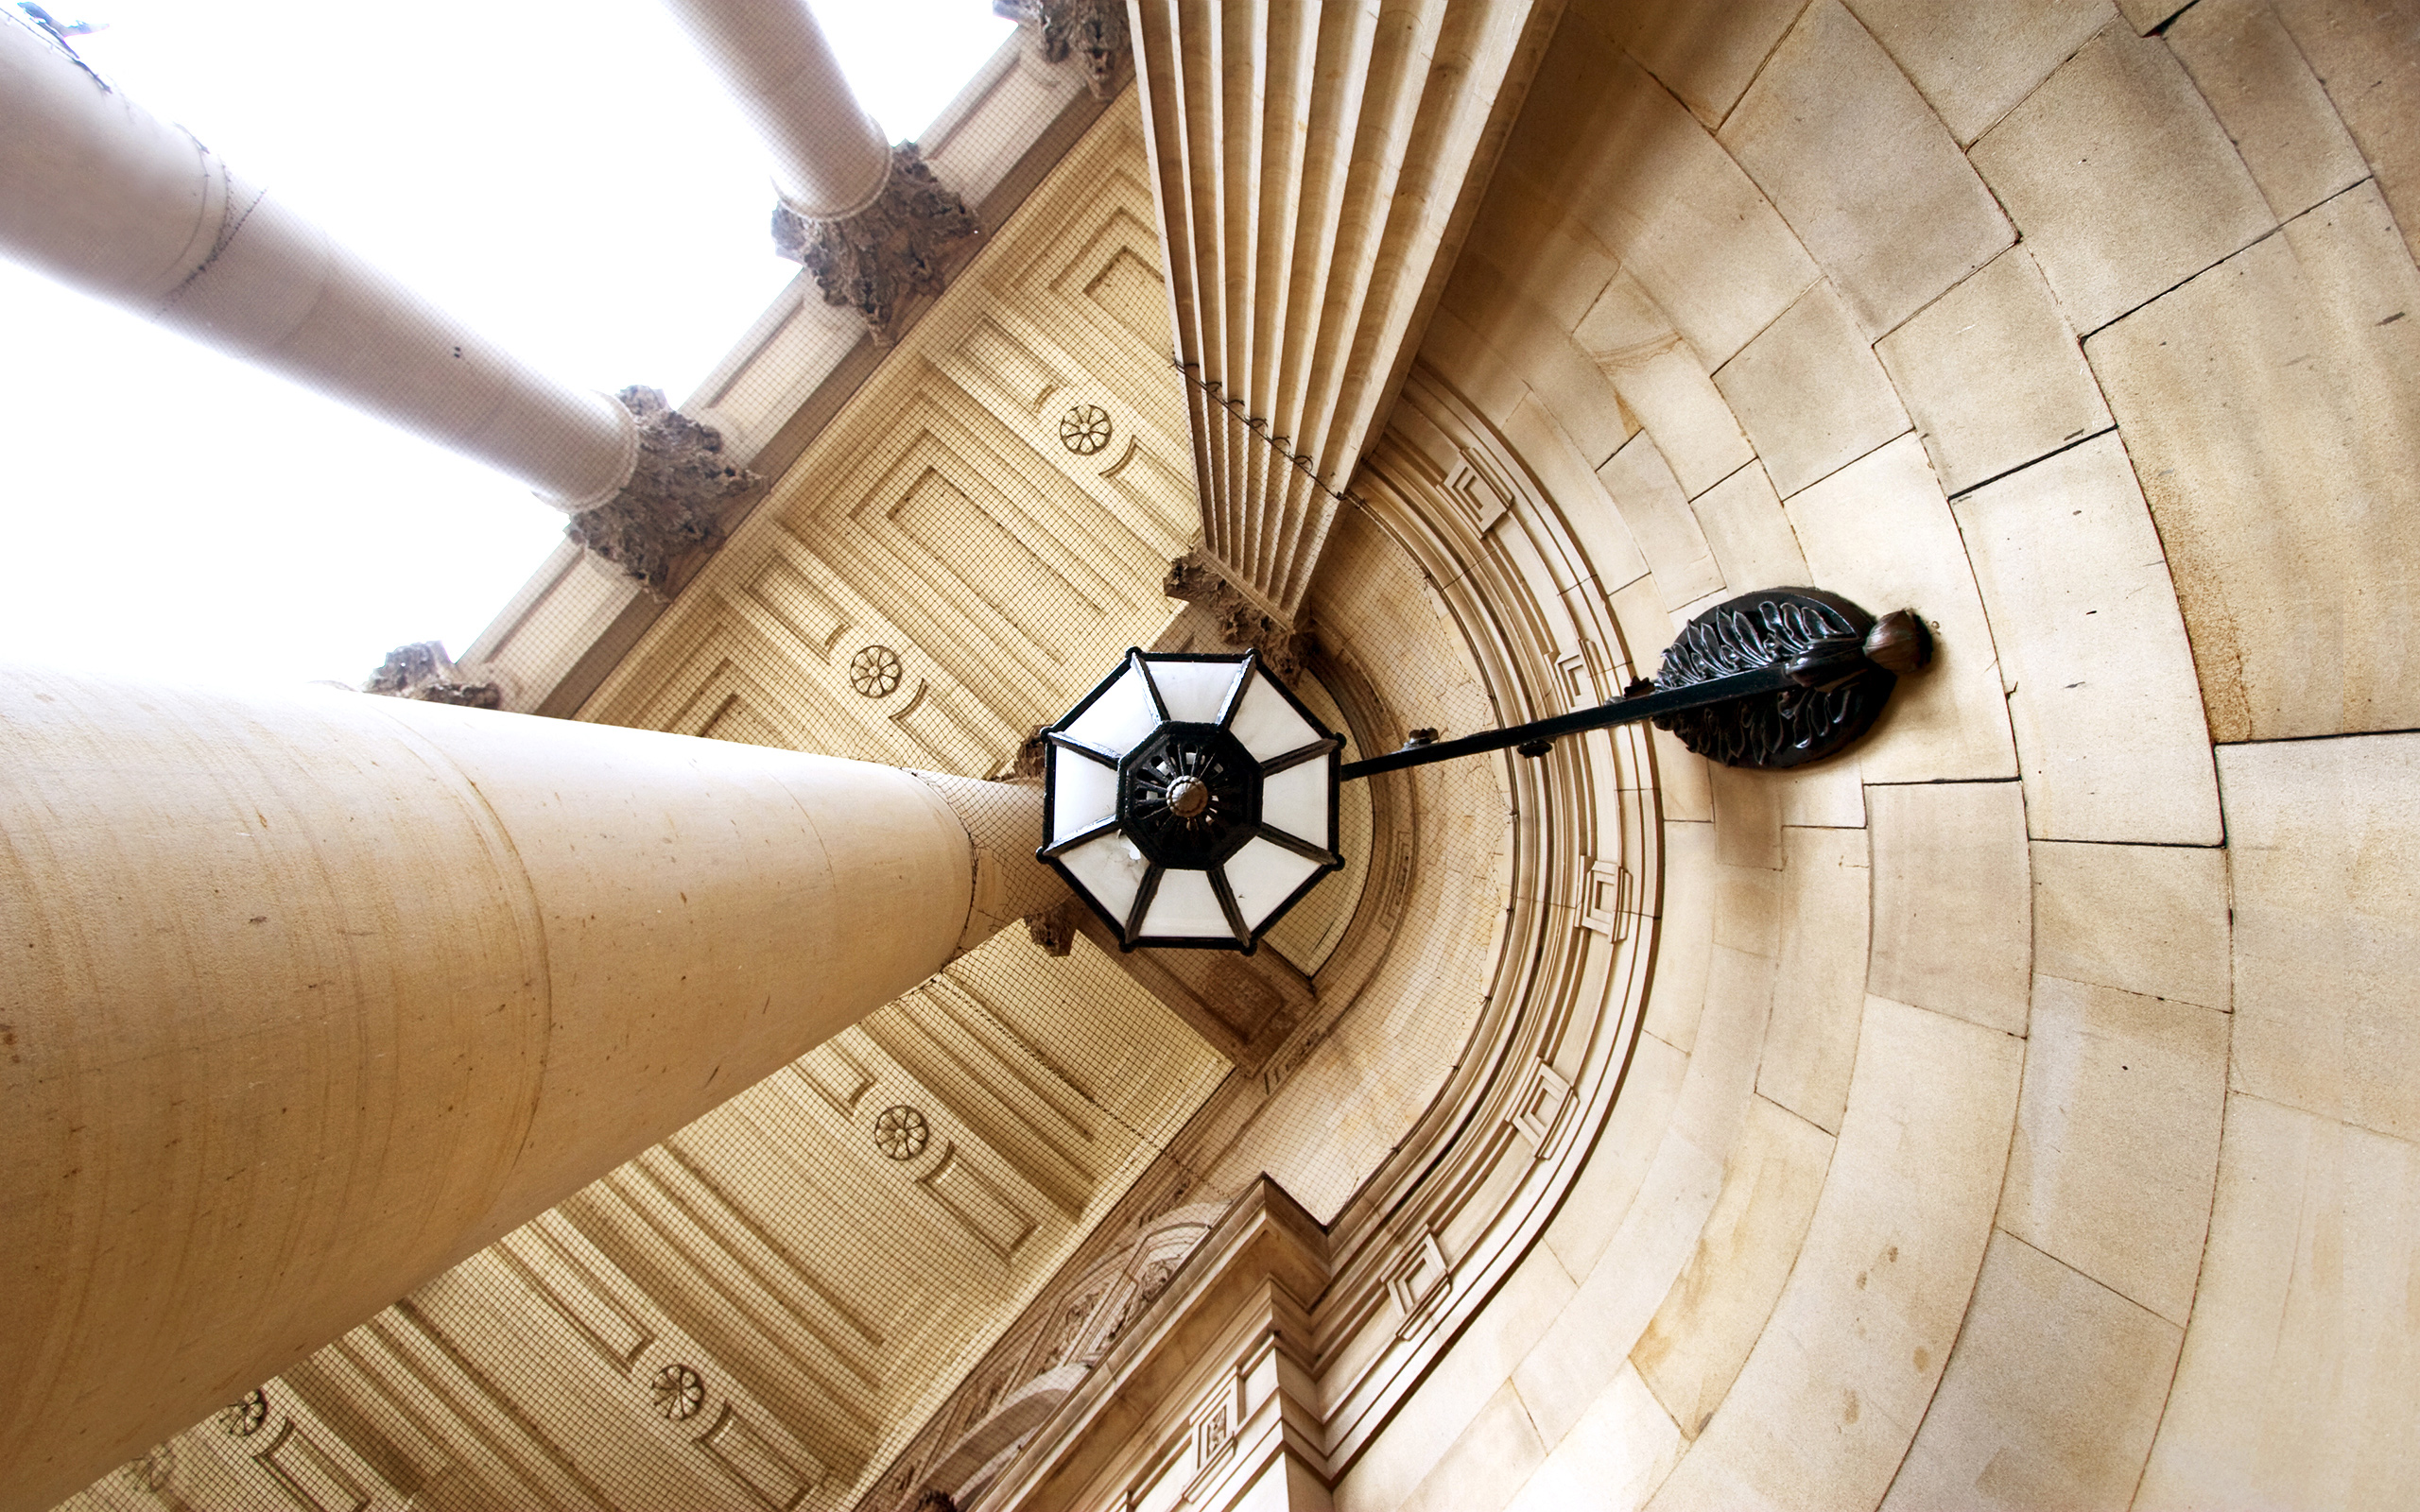 Image of the entrance to the Capital Building looking up at architectural detail